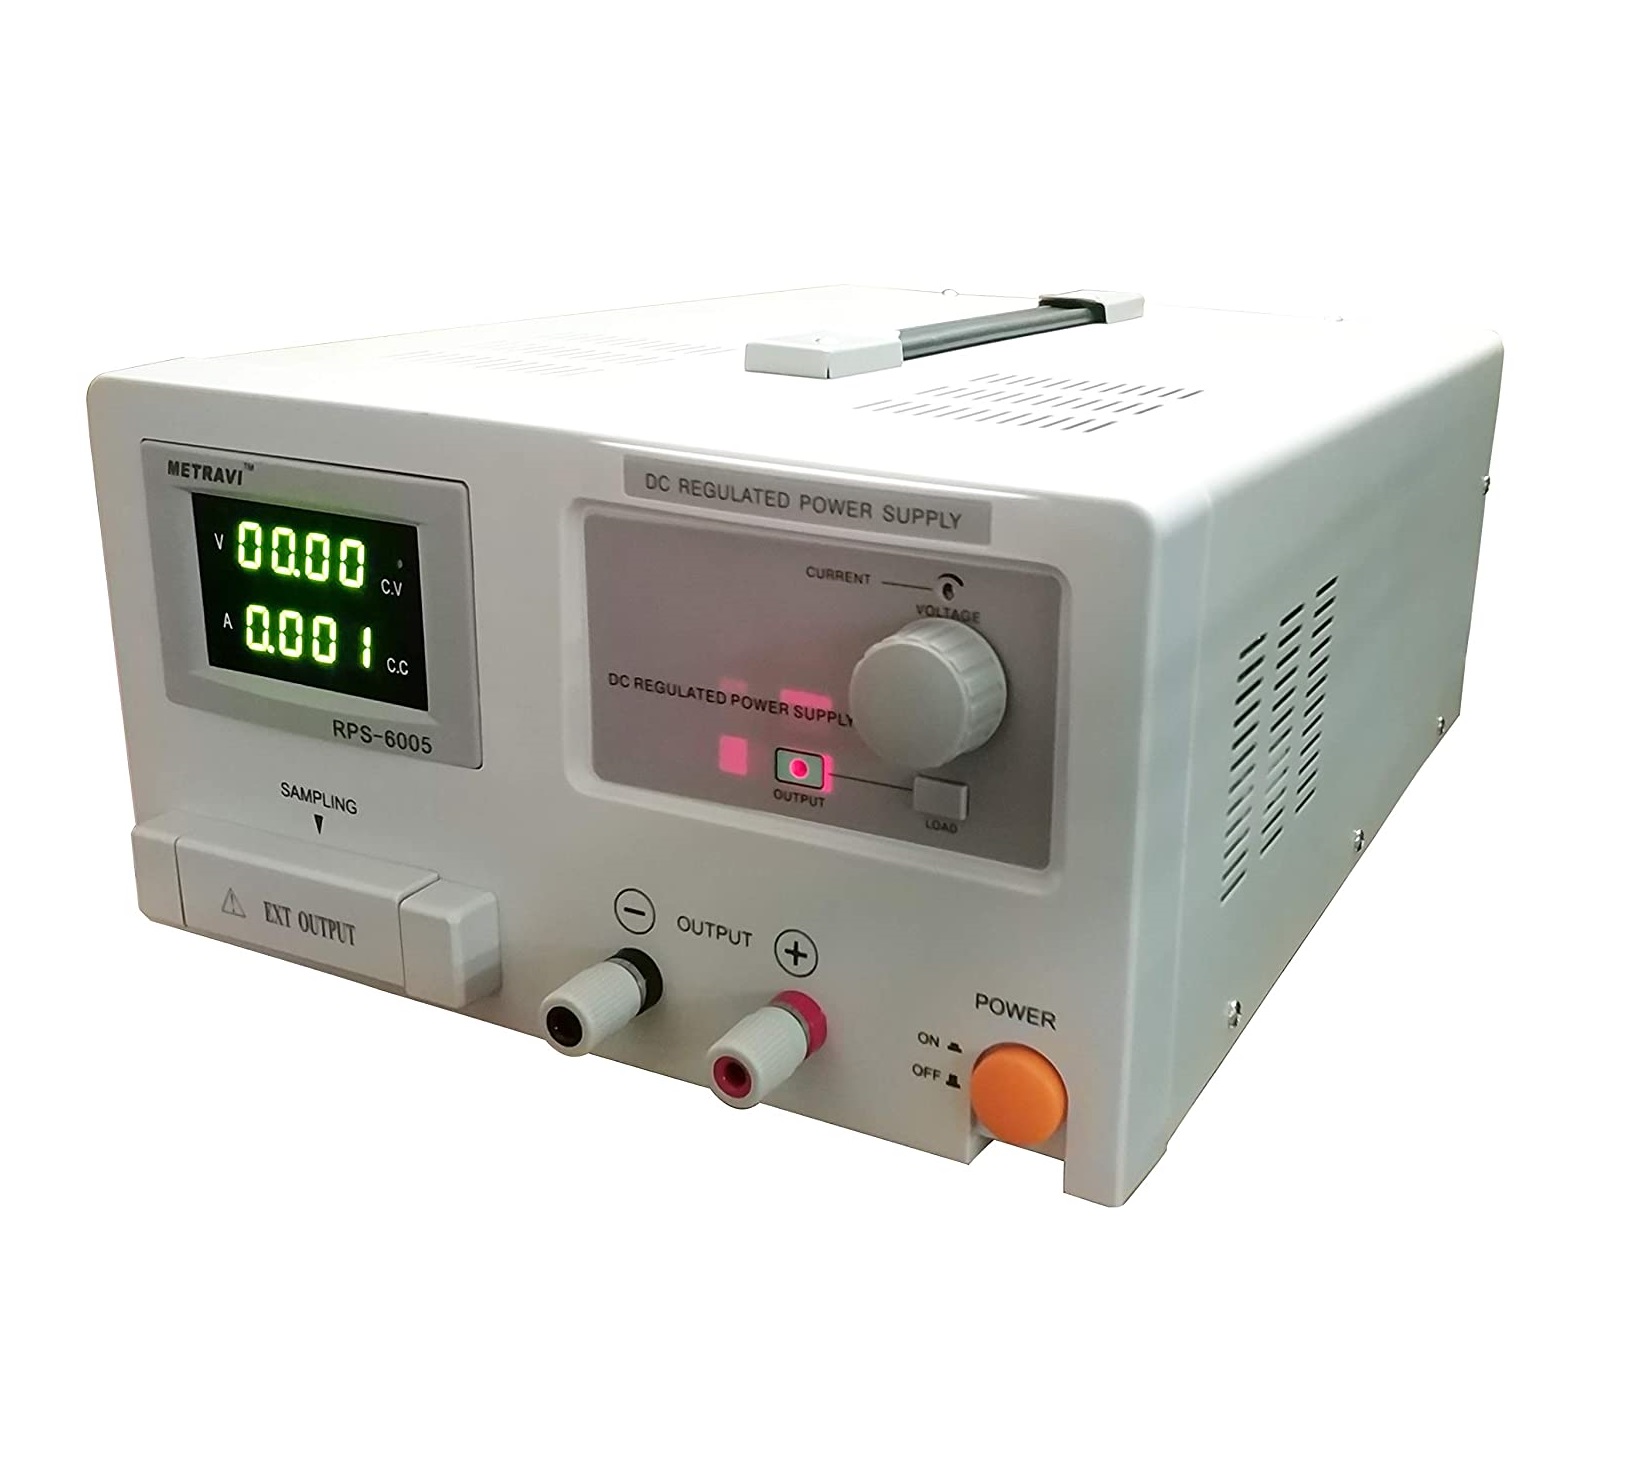 Metravi RPS-6005 DC Regulated Power Supply - Single Output with Backlit LCD Display of Variable 0-60V / 0-5A DC